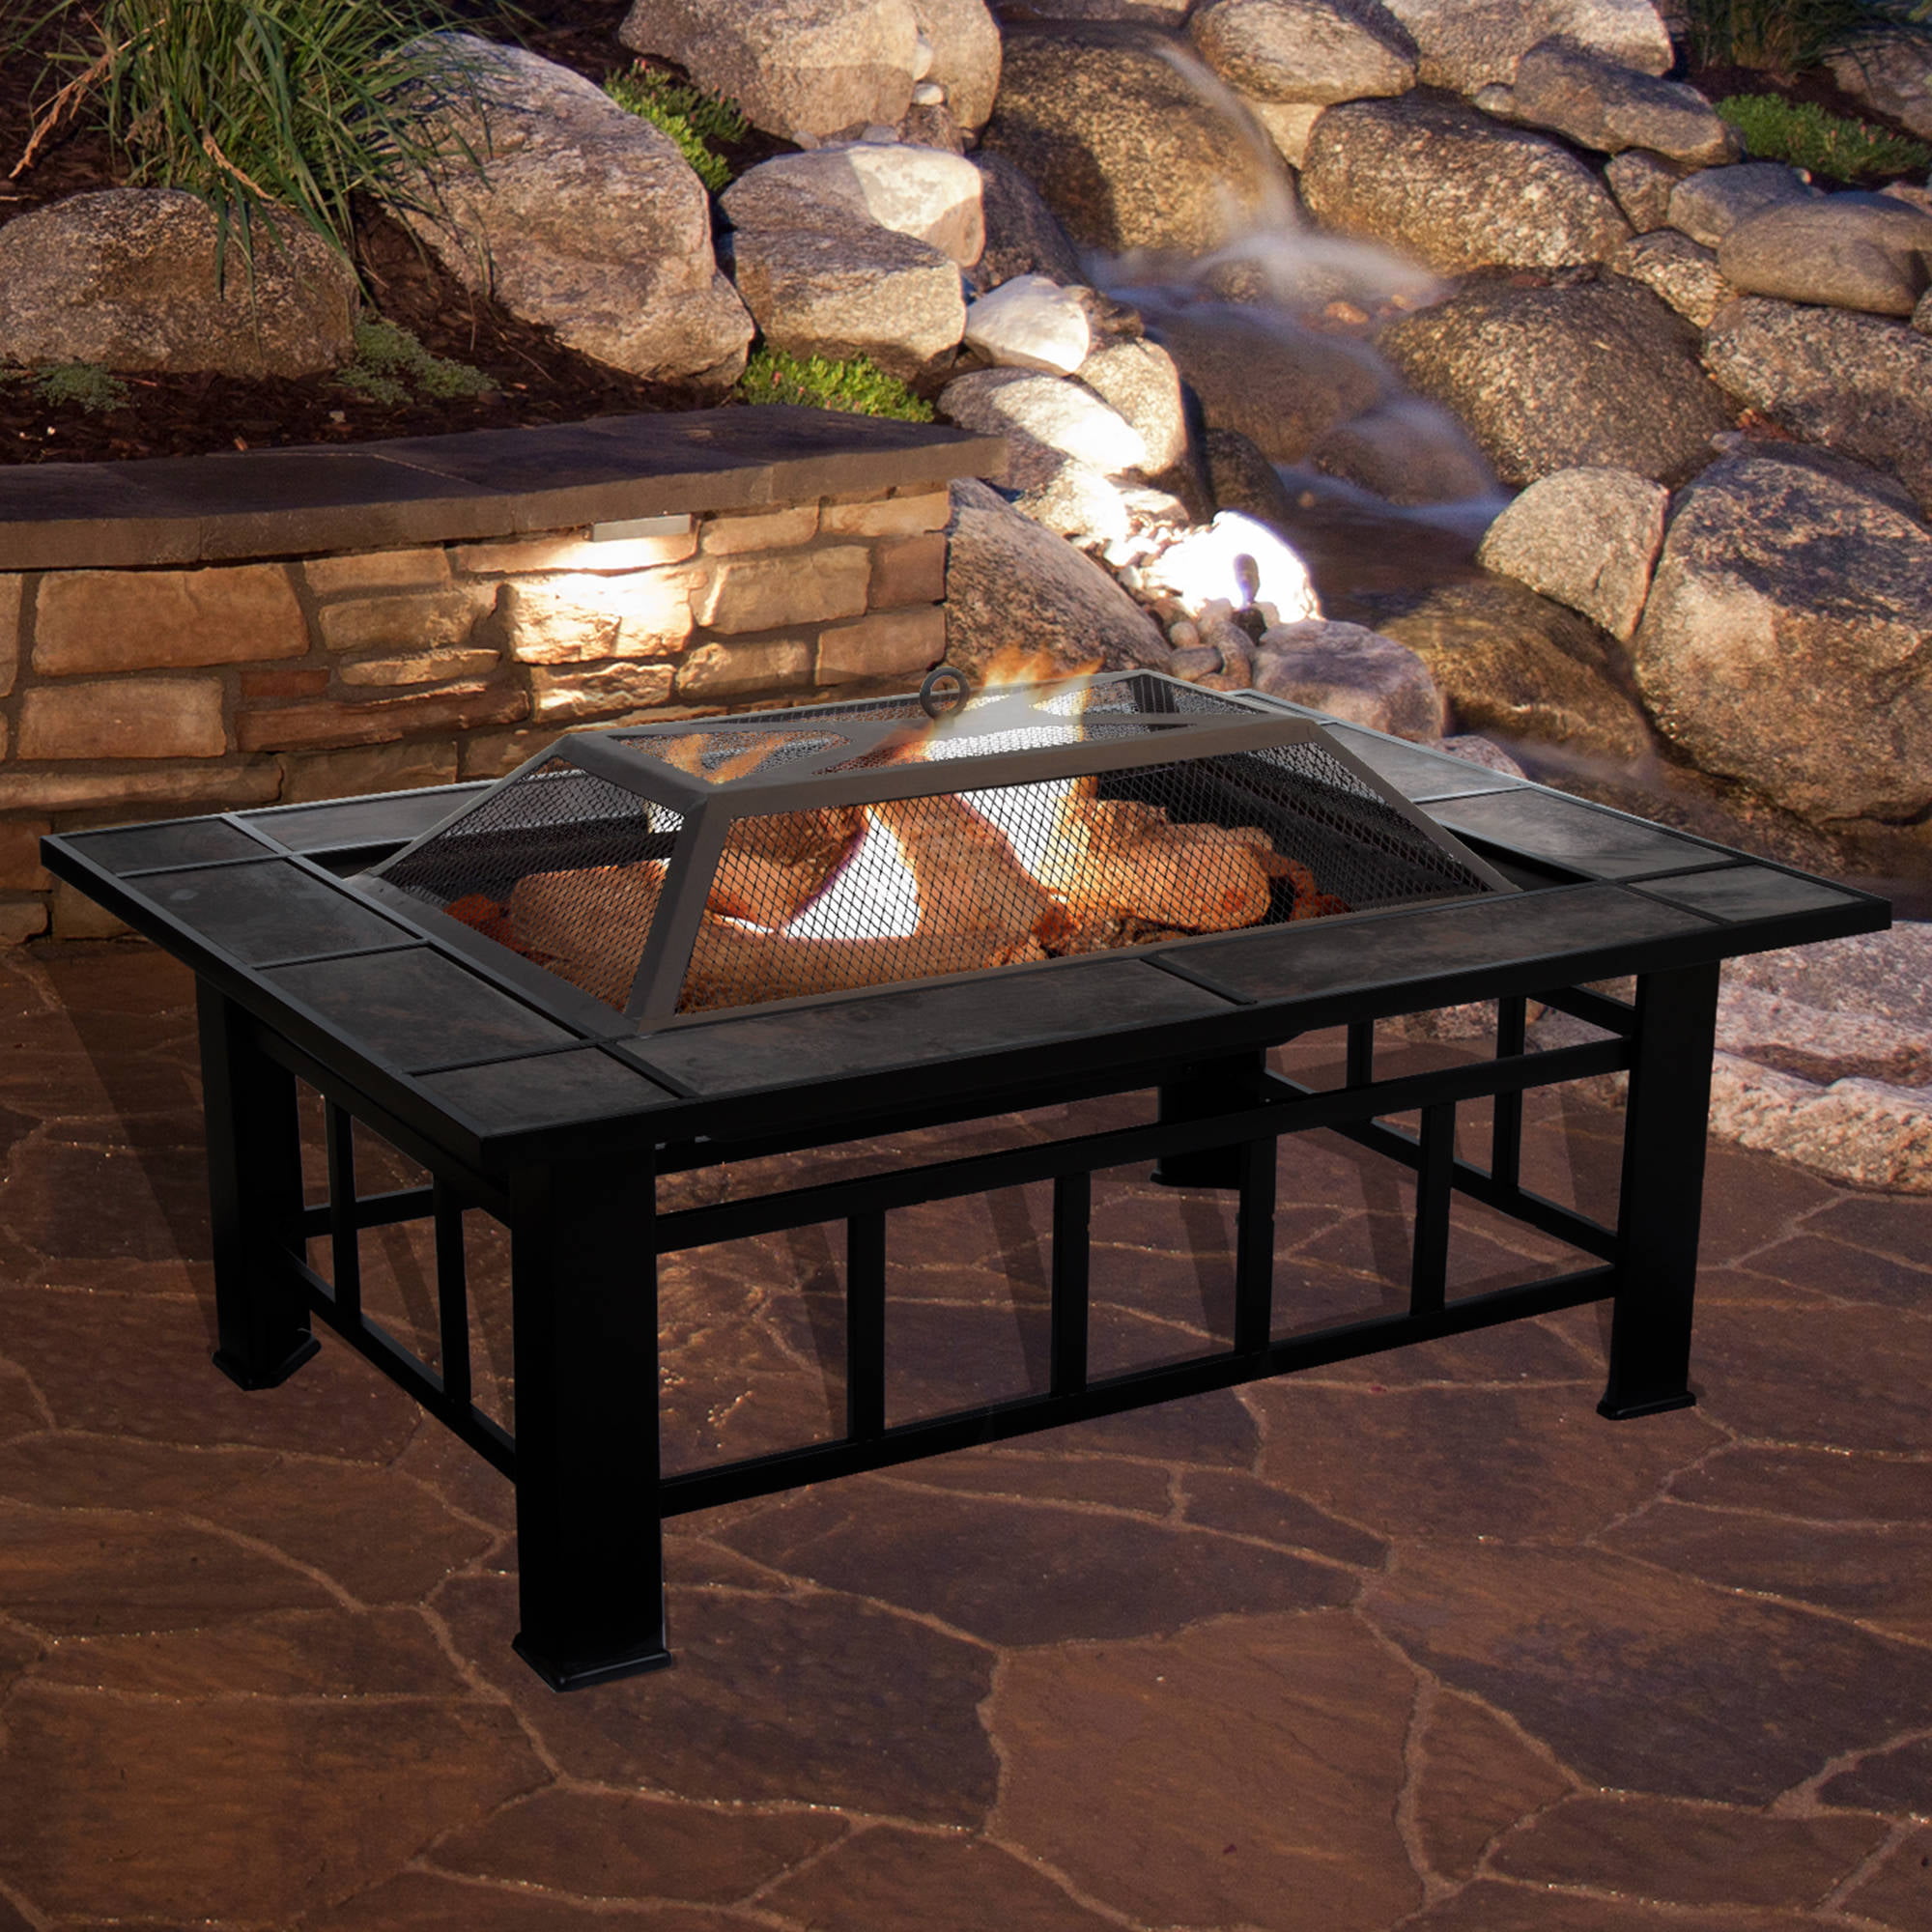 Axxonn 34 Inch Tuscan Ceramic Outdoor Tile Top Fire Pit Black Antique Bronze for sale online 